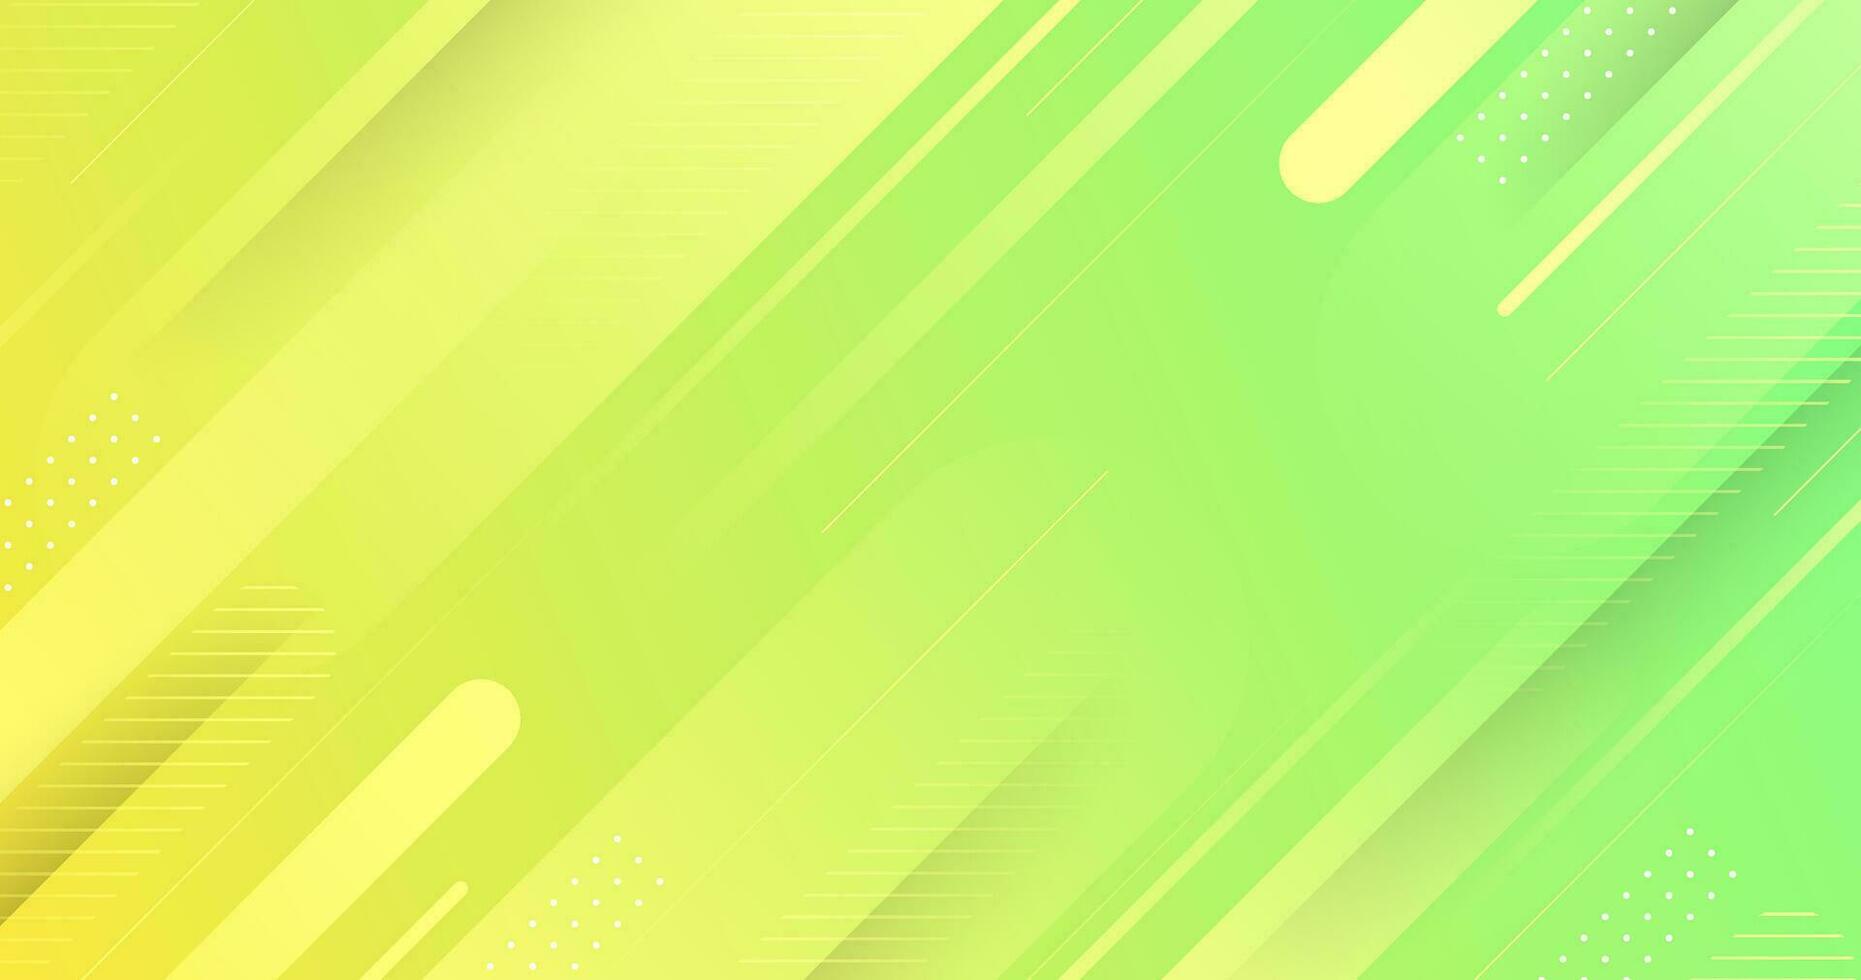 Abstract banner design. Colorful green and yellow vector